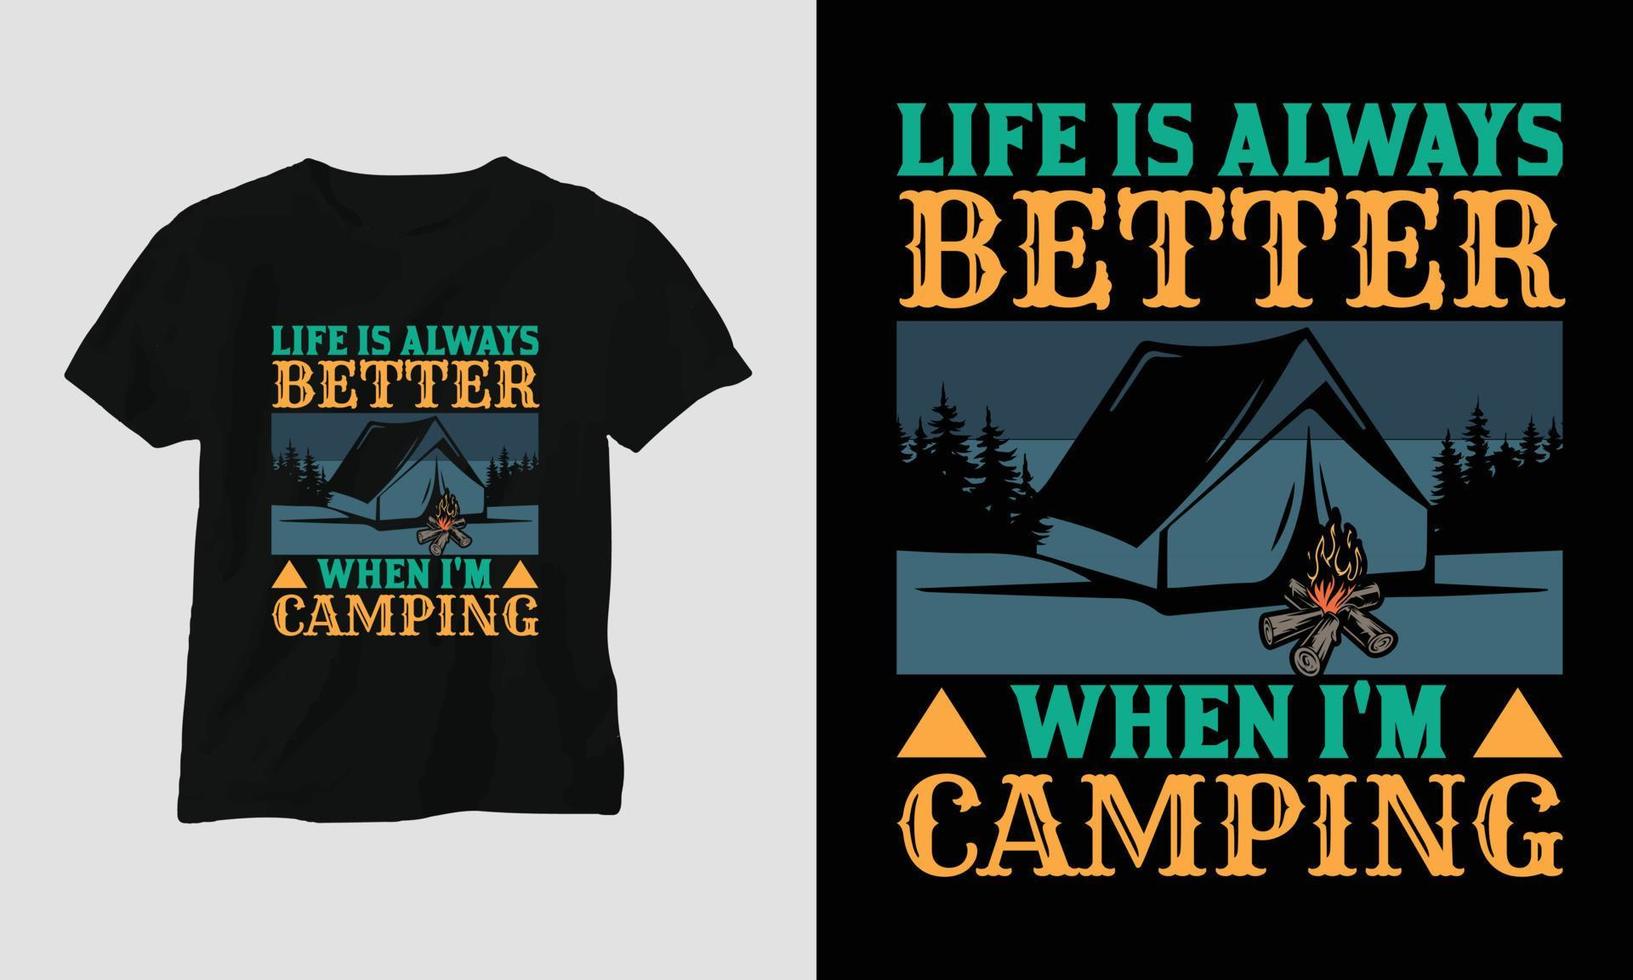 Life is always better when i'm camping - Camping T-shirt Design vector